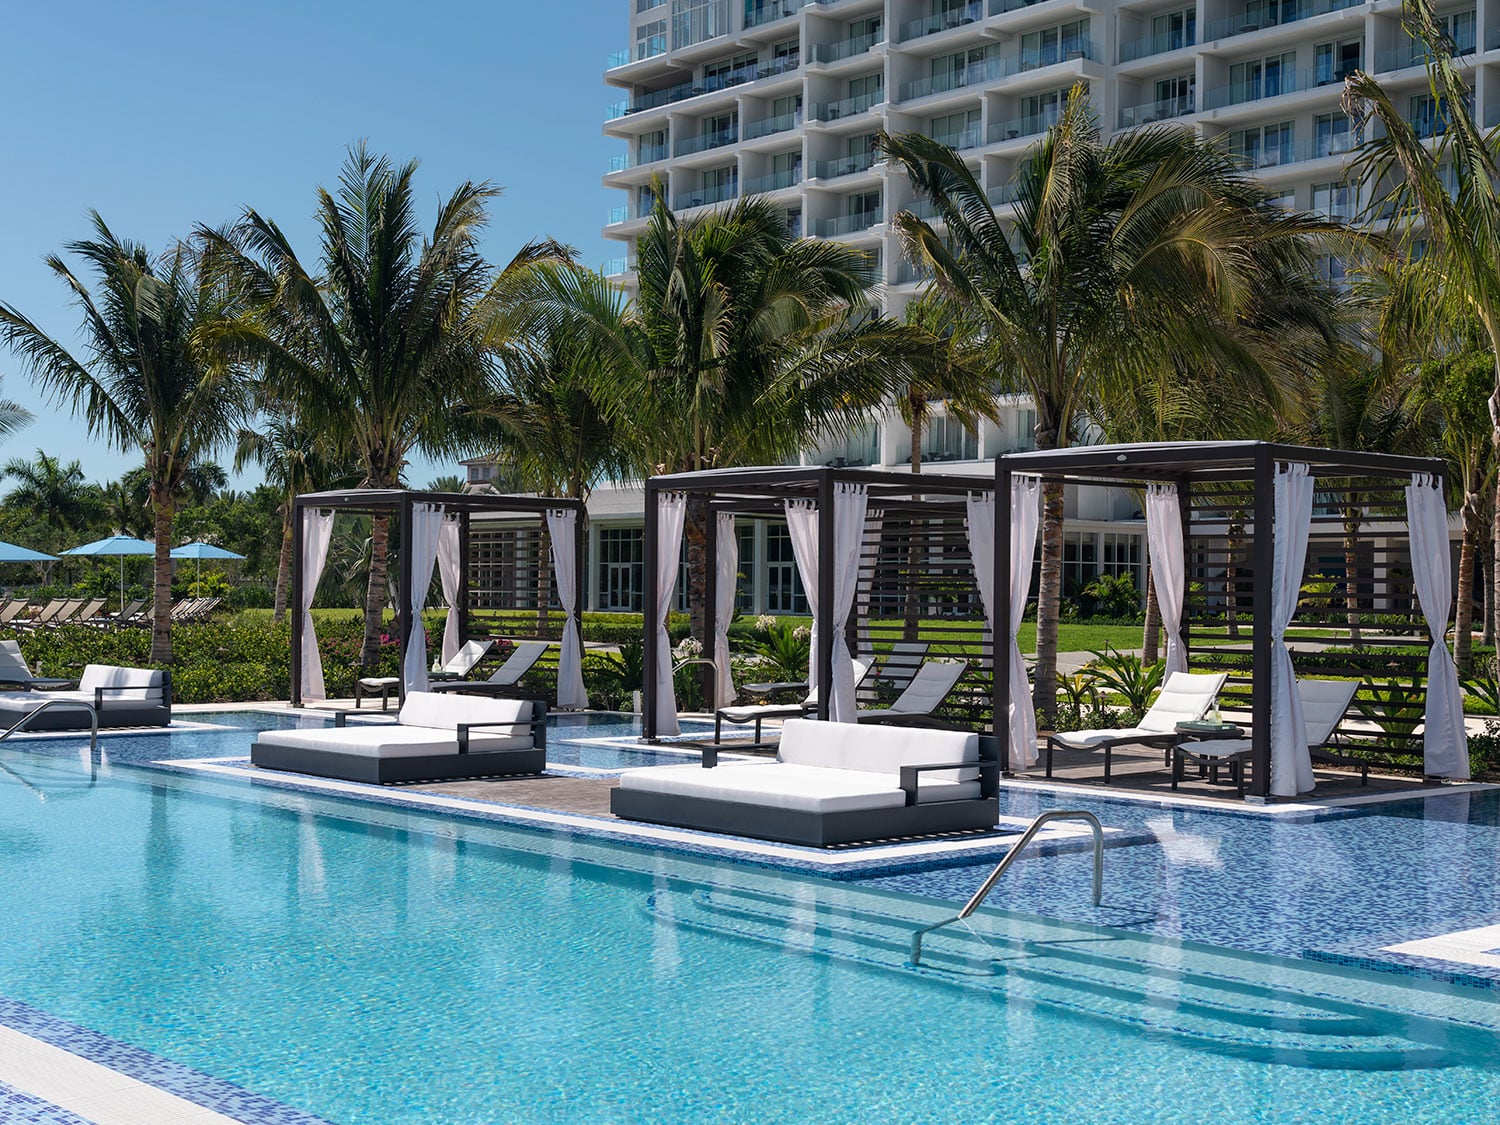 One of the pools and its private cabanas at the Ritz-Carlton, Turks and Caicos, on the island of Providenciales.